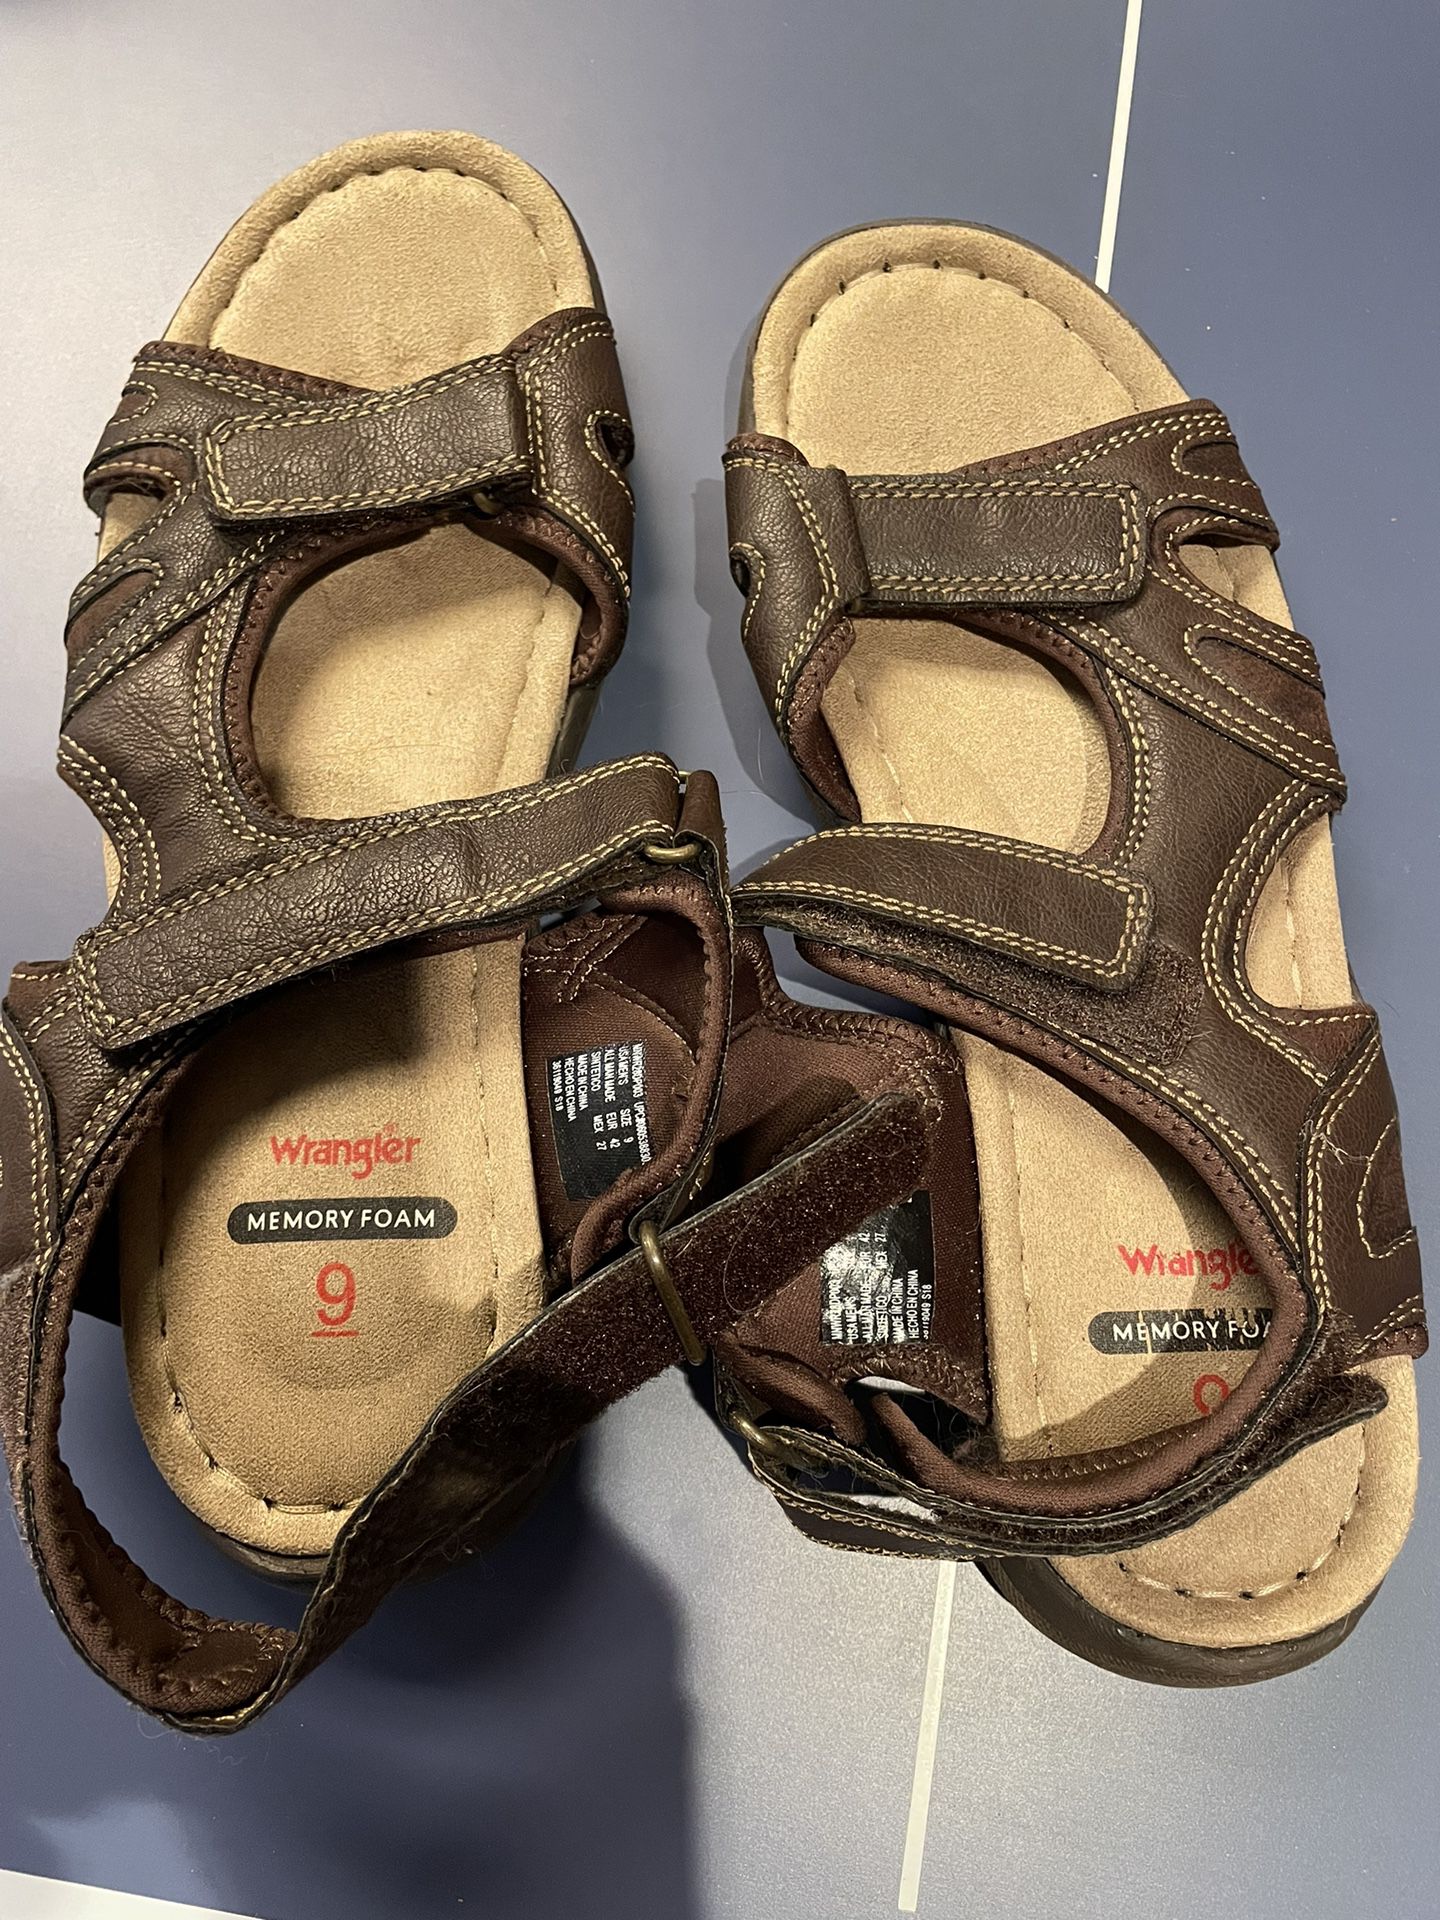 Mens Wrangler Memory Foam Sandals for Sale in Crown Point, IN - OfferUp